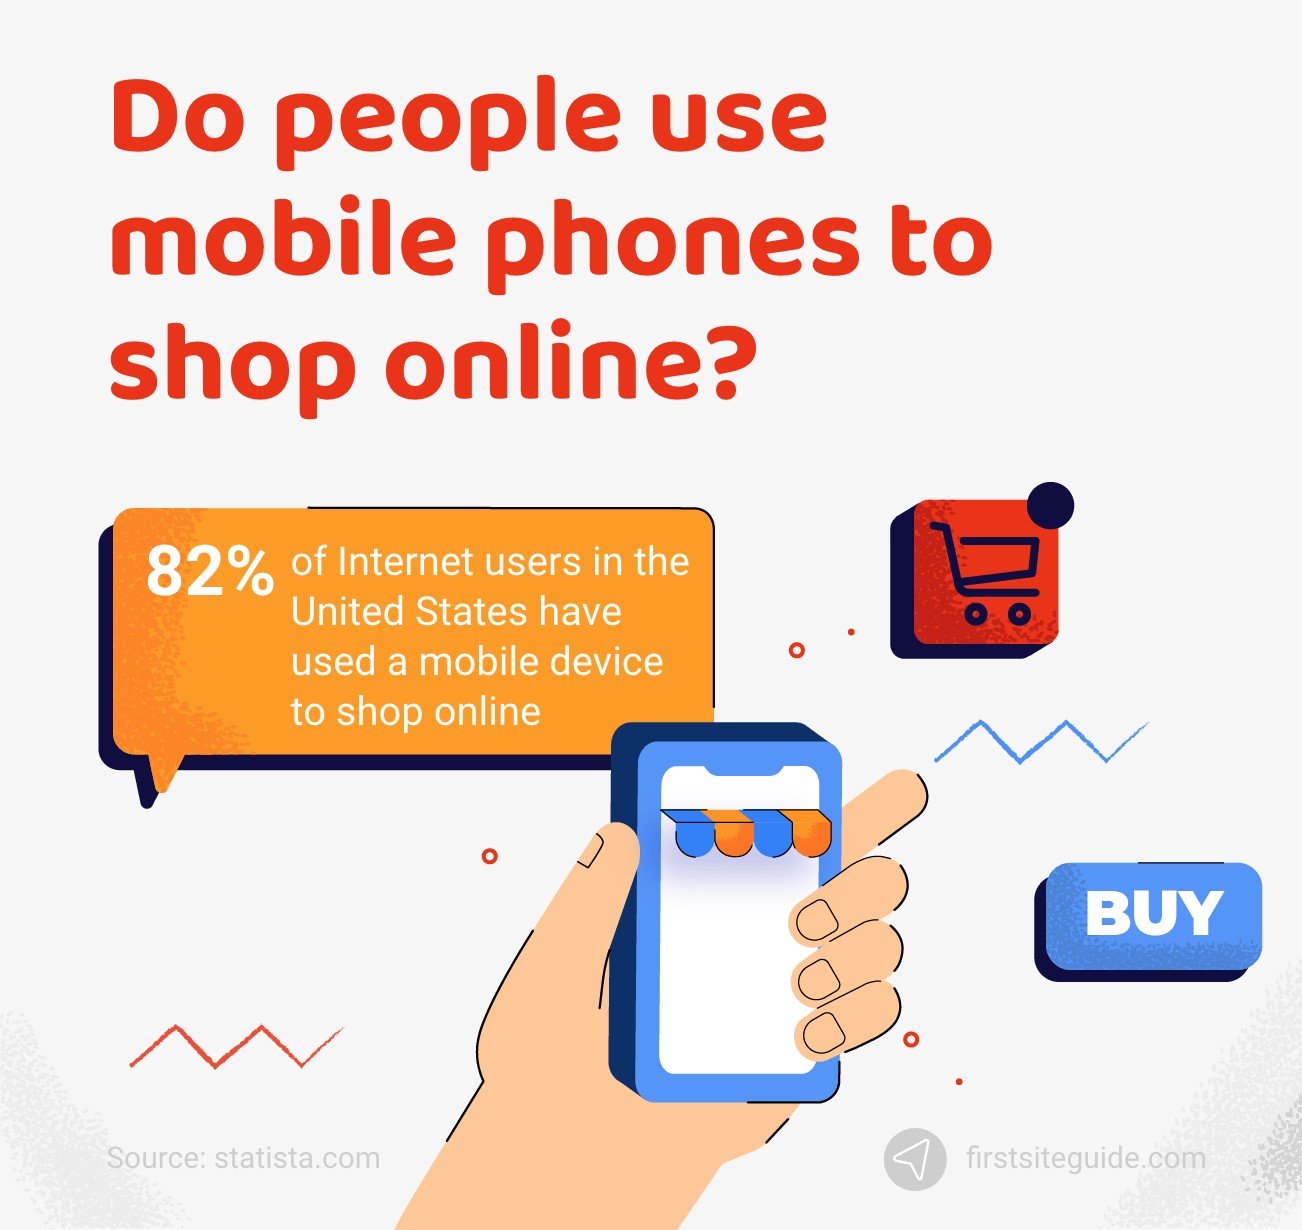 Do people use mobile phones to shop online?